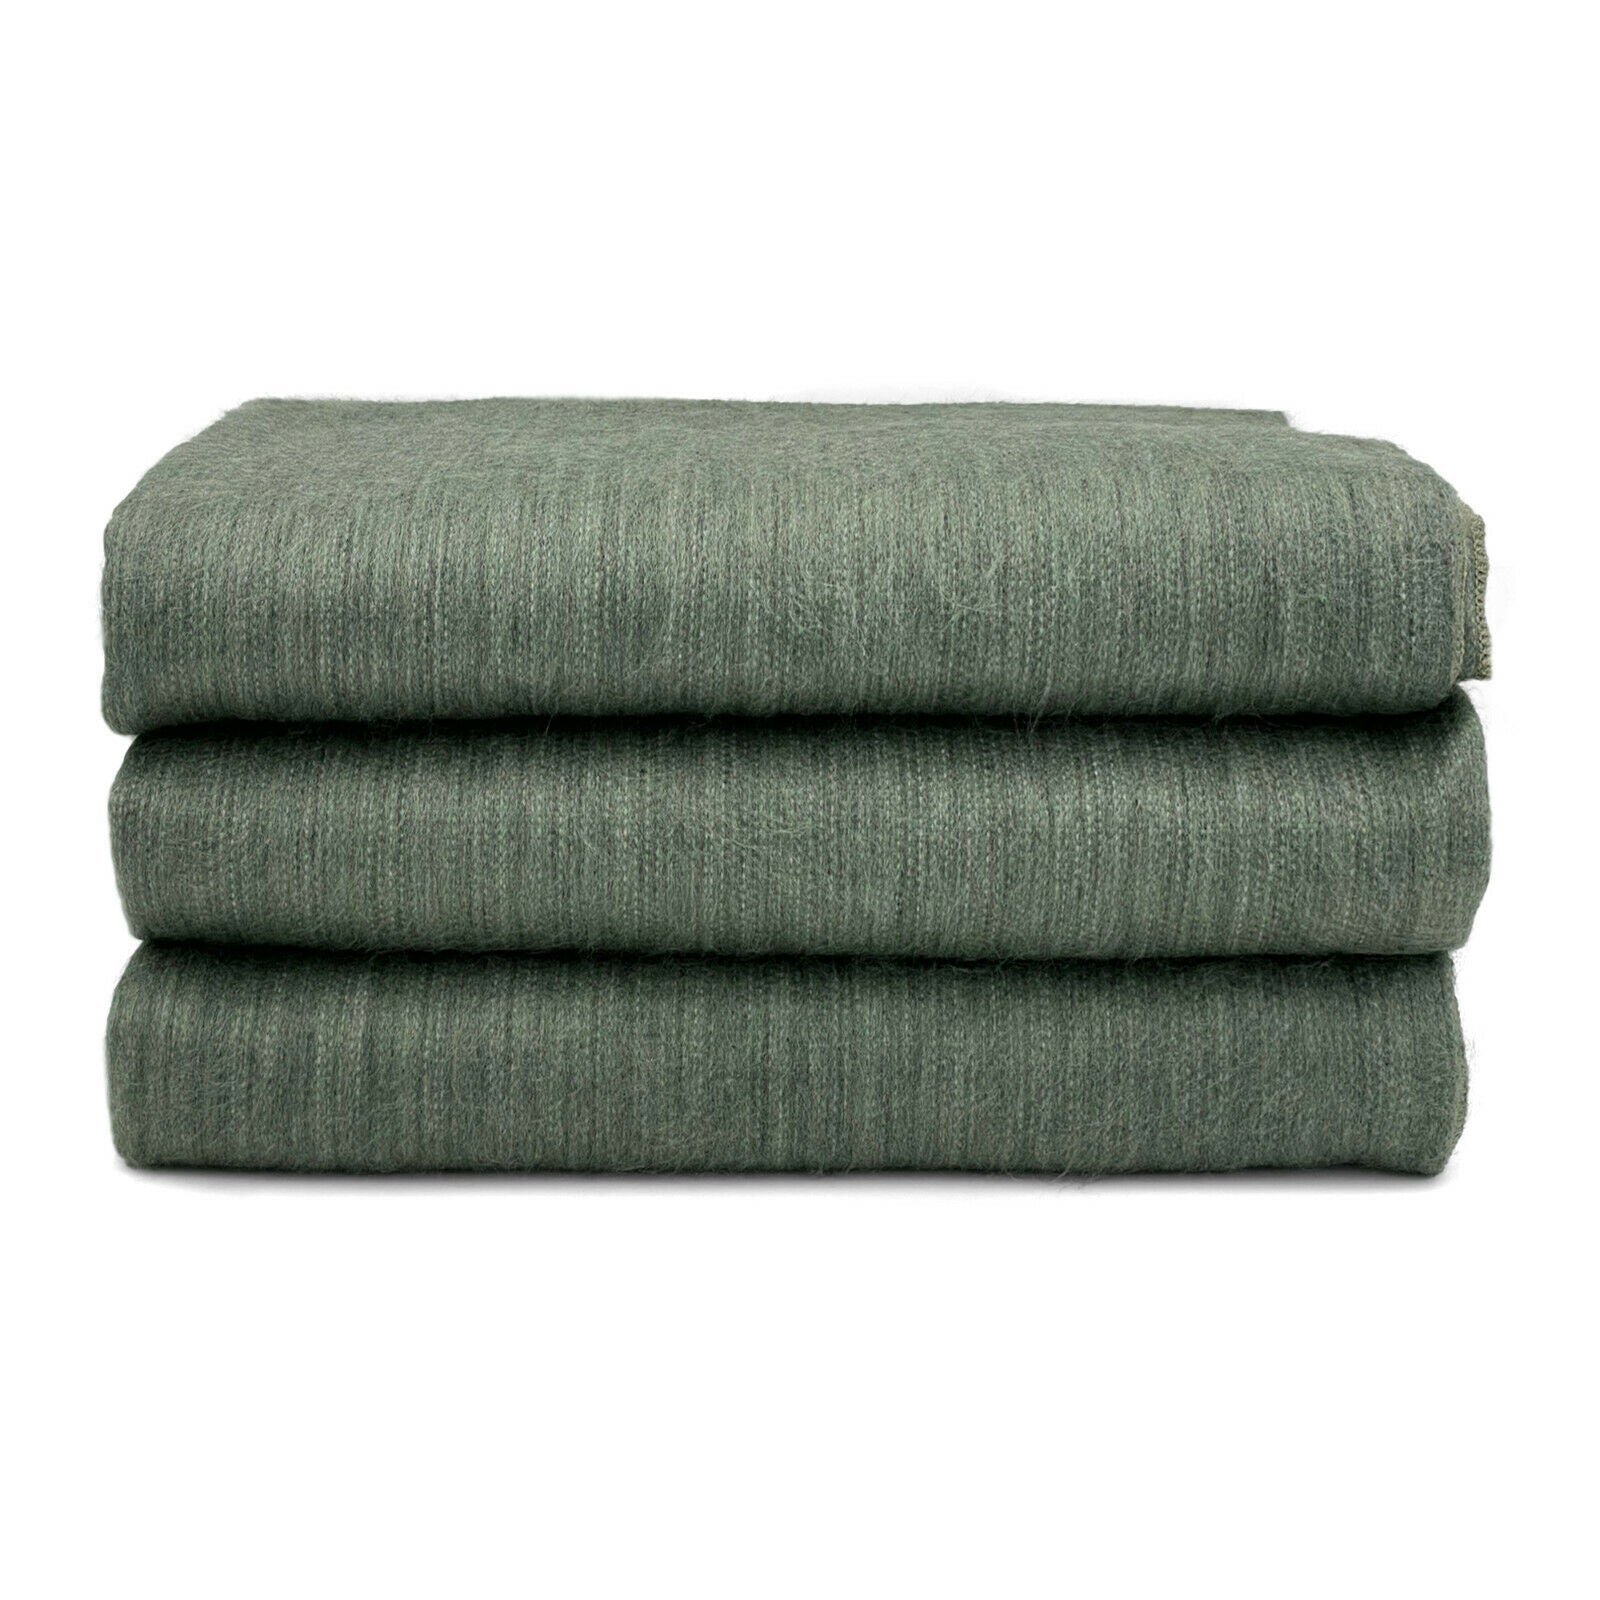 Pituca - Baby Alpaca Wool Throw Blanket / Sofa Cover - Queen 93" x 67" - solid green mica pattern